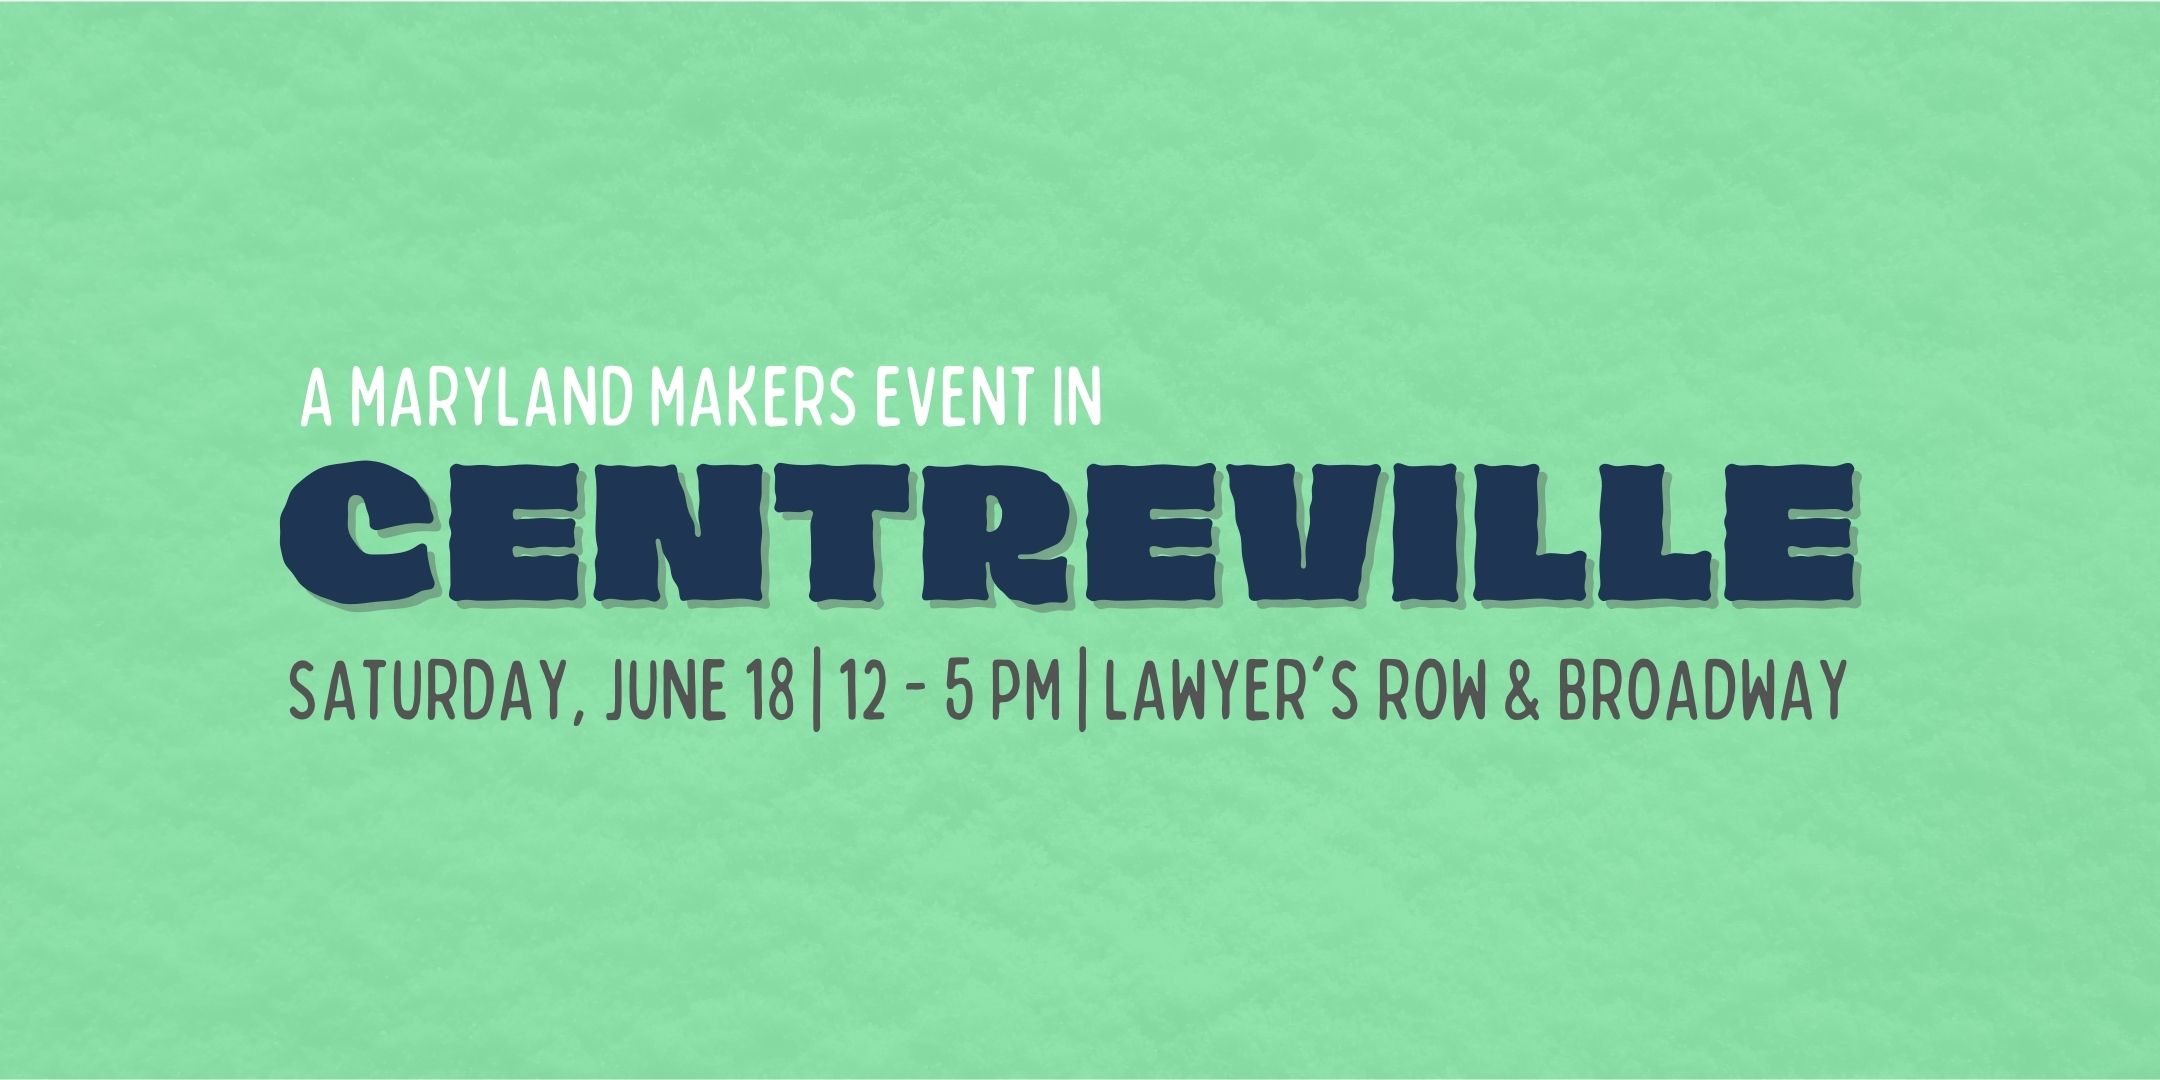 THE TOWN OF CENTREVILLE SHOWCASES MARYLAND MAKERS FOR THE FIFTH YEAR￼